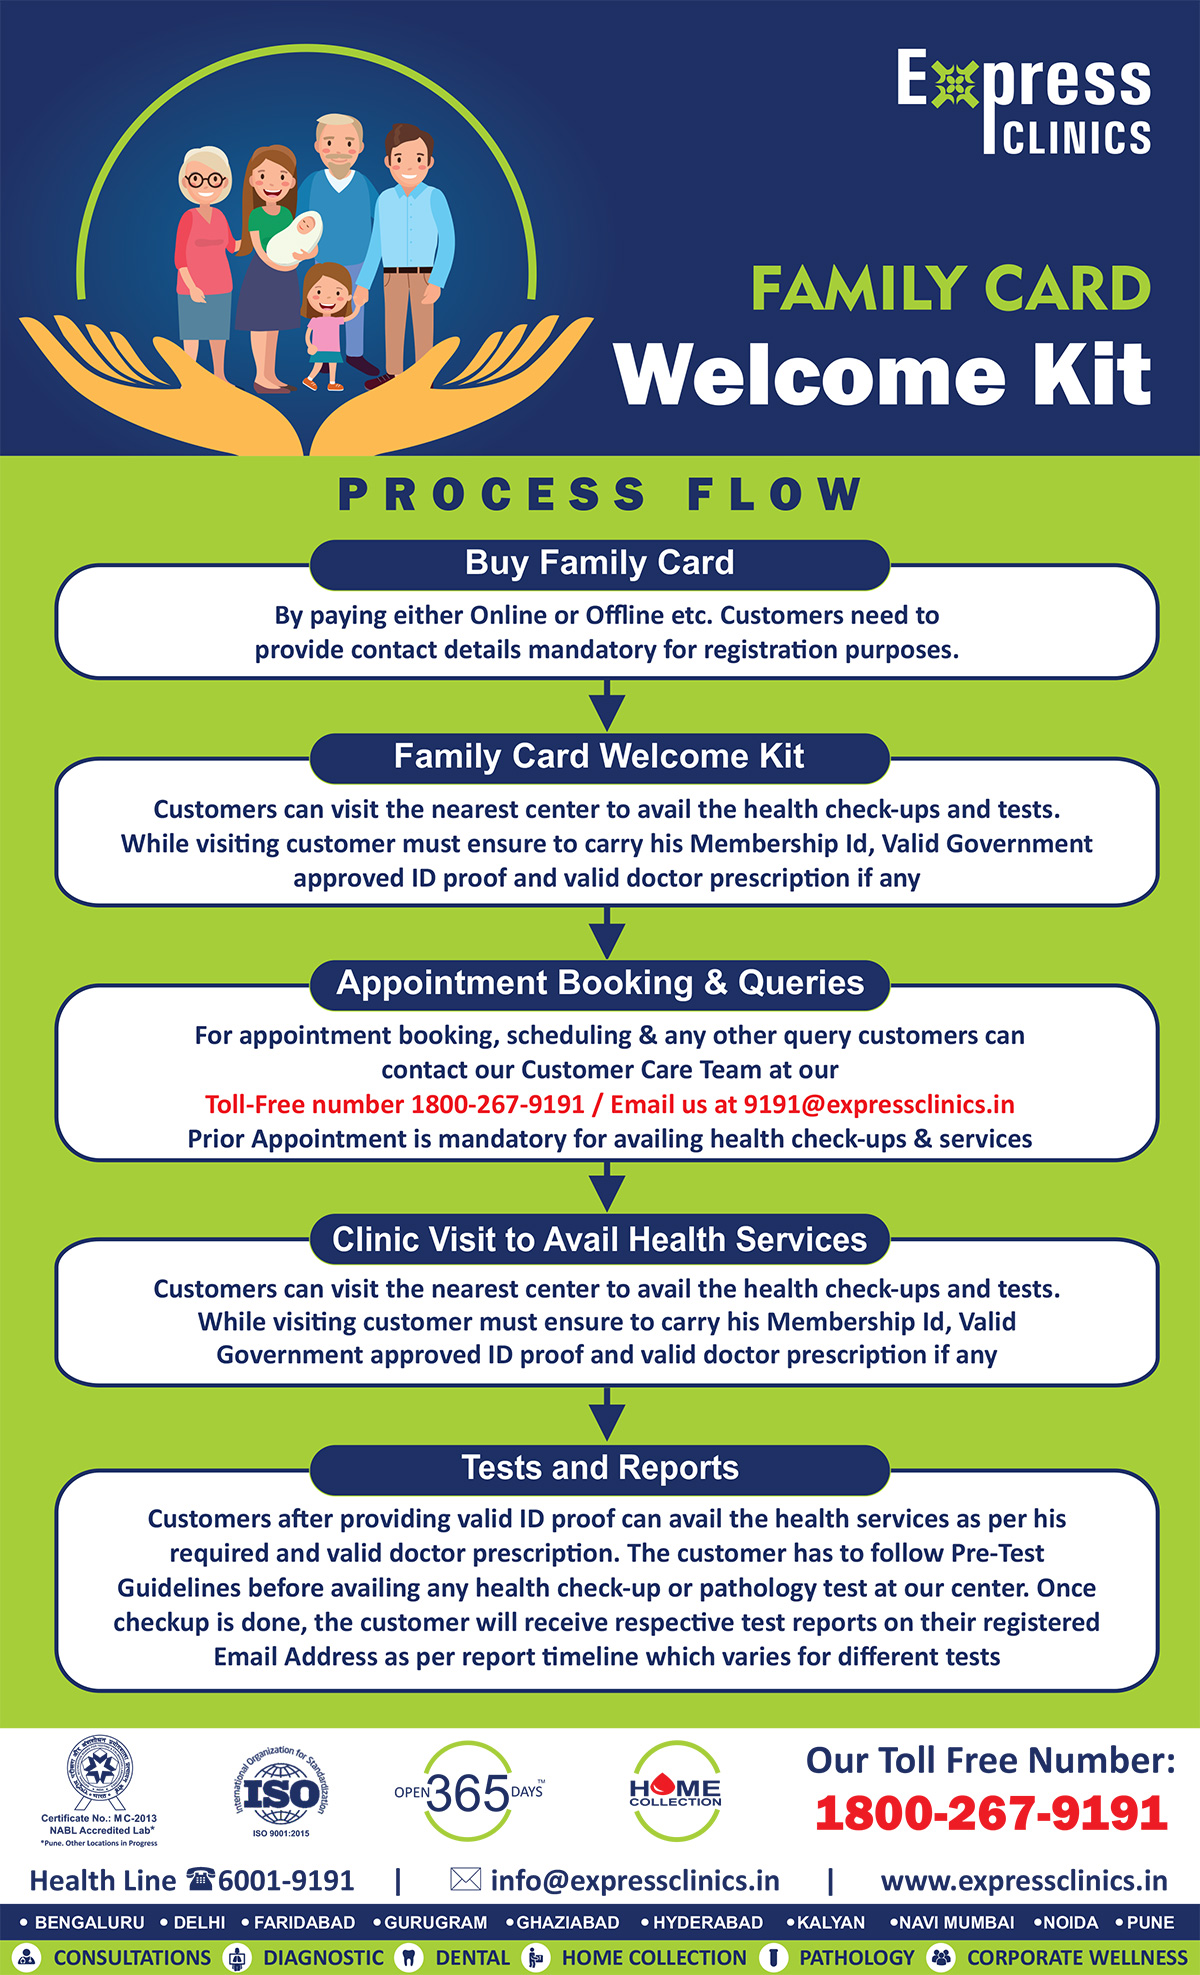 Express Clinics Family Card Process Flow for Customer